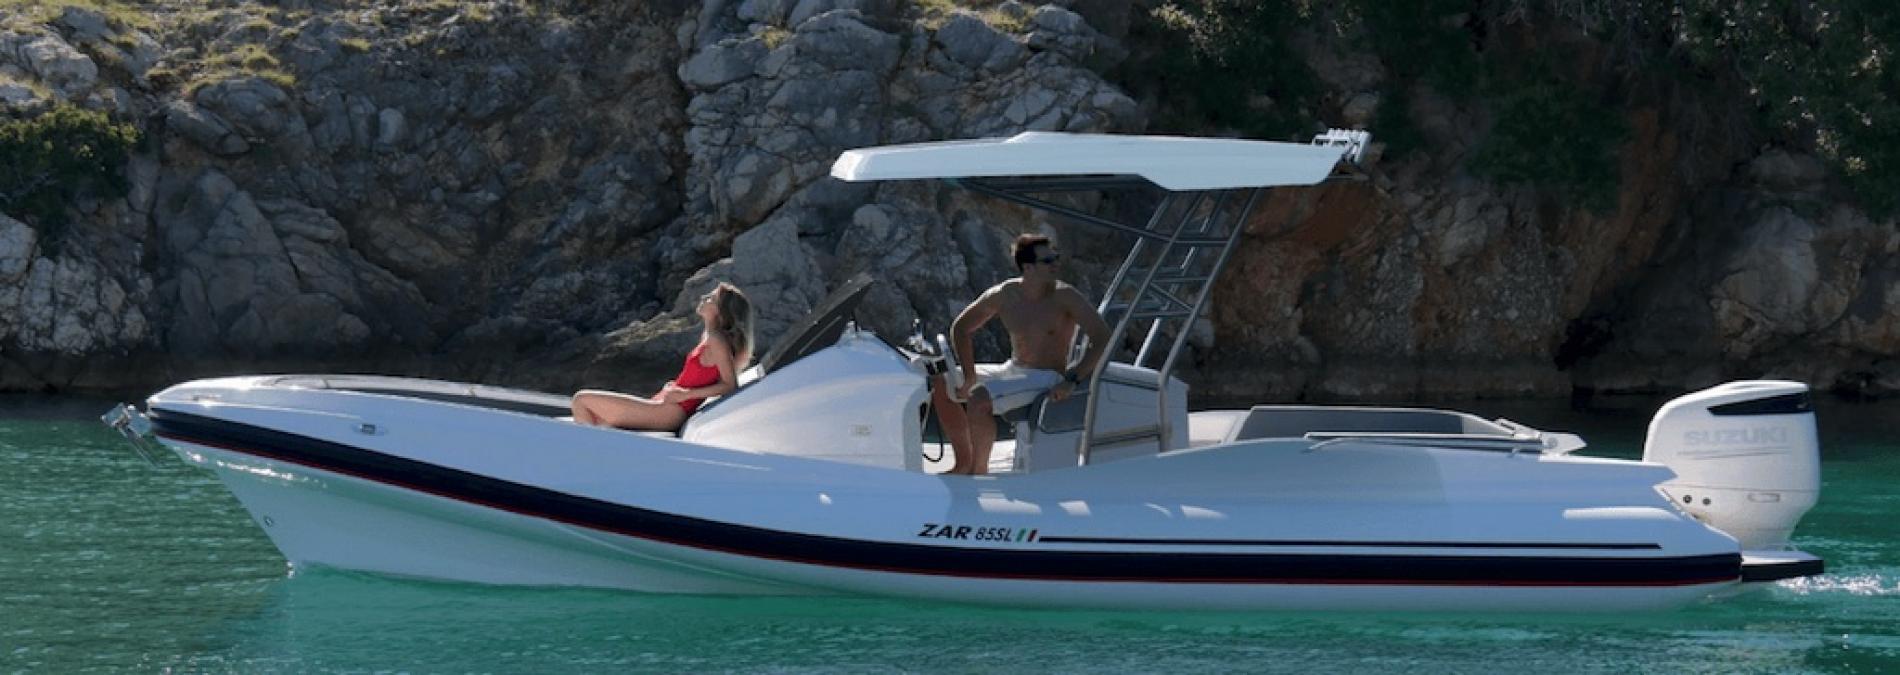 Amber Yachting: new Zar Formenti dealer for the Alpes Maritimes